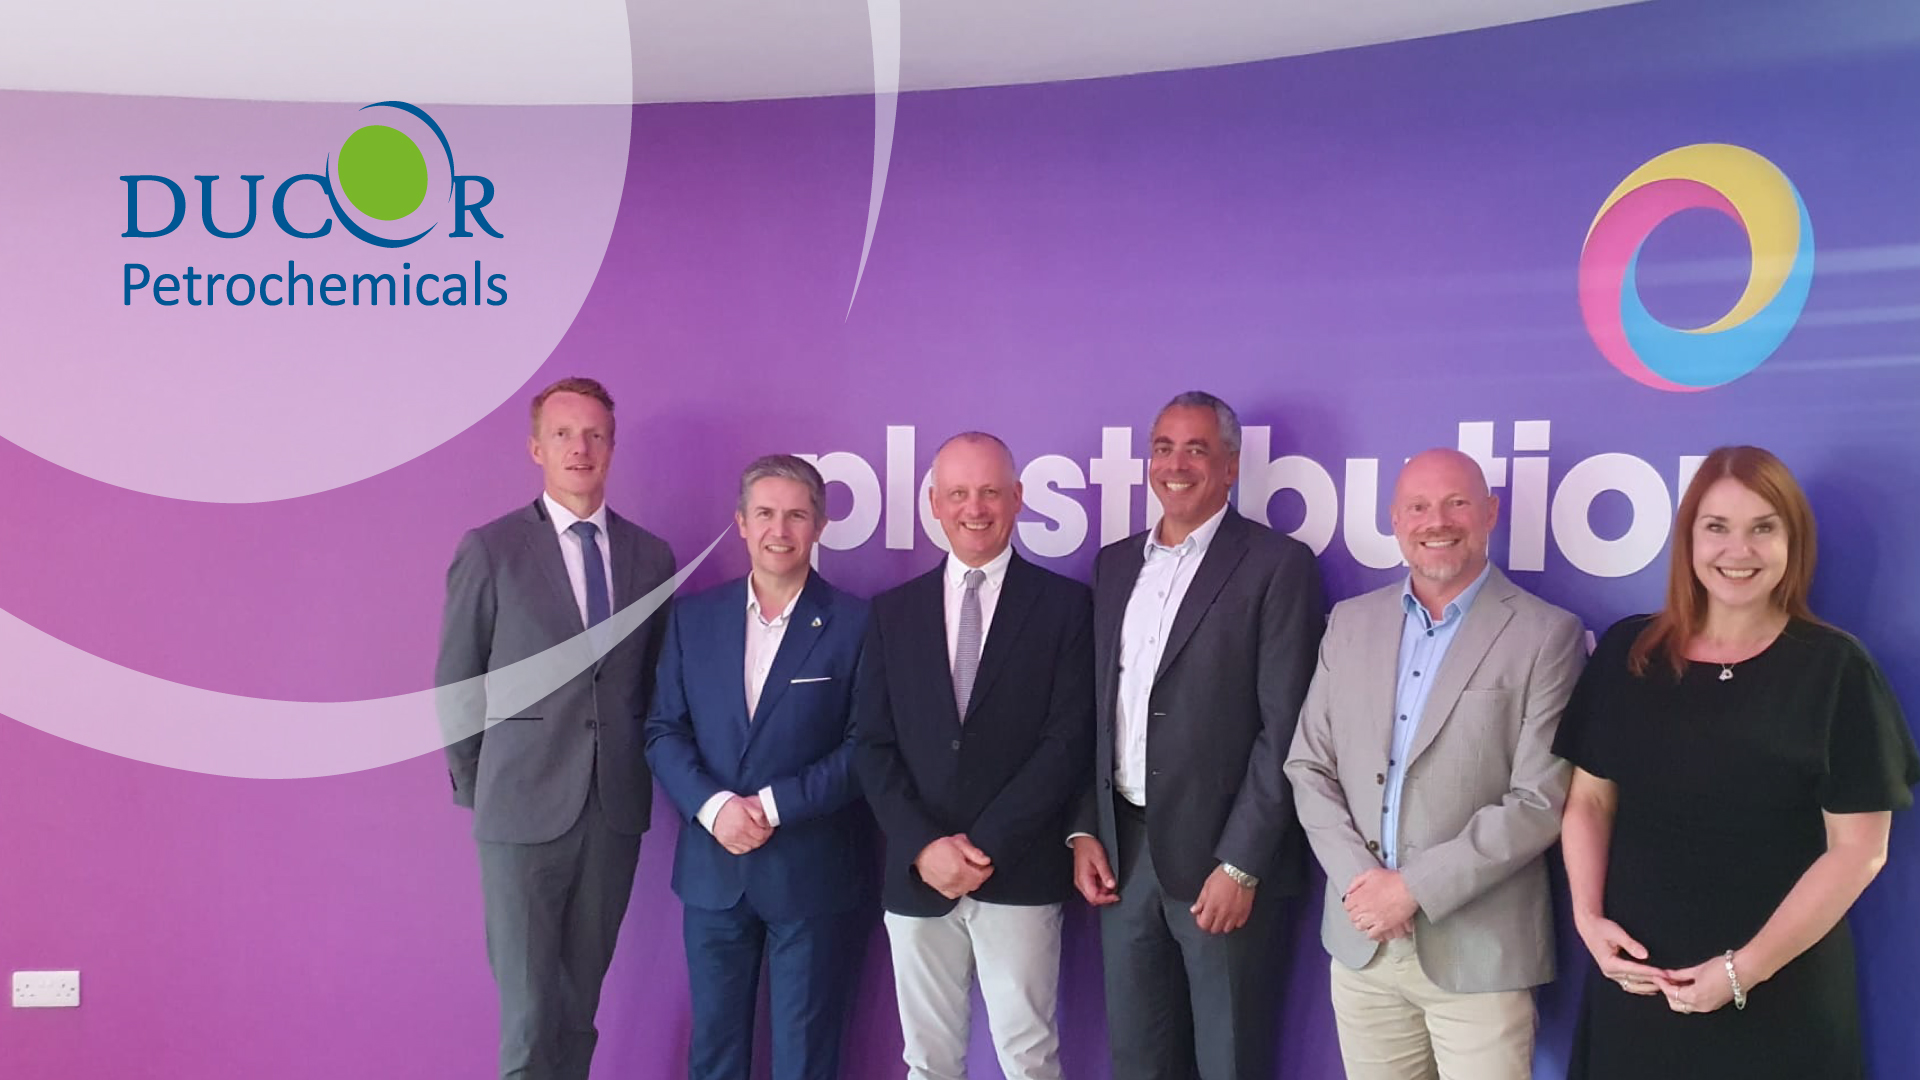 DUCOR PETROCHEMICALS EXCLUSIVELY PARTNERS WITH PLASTRIBUTION, TO DISTRIBUTE DUCARE PRODUCTS IN THE UNITED KINGDOM AND IRELAND